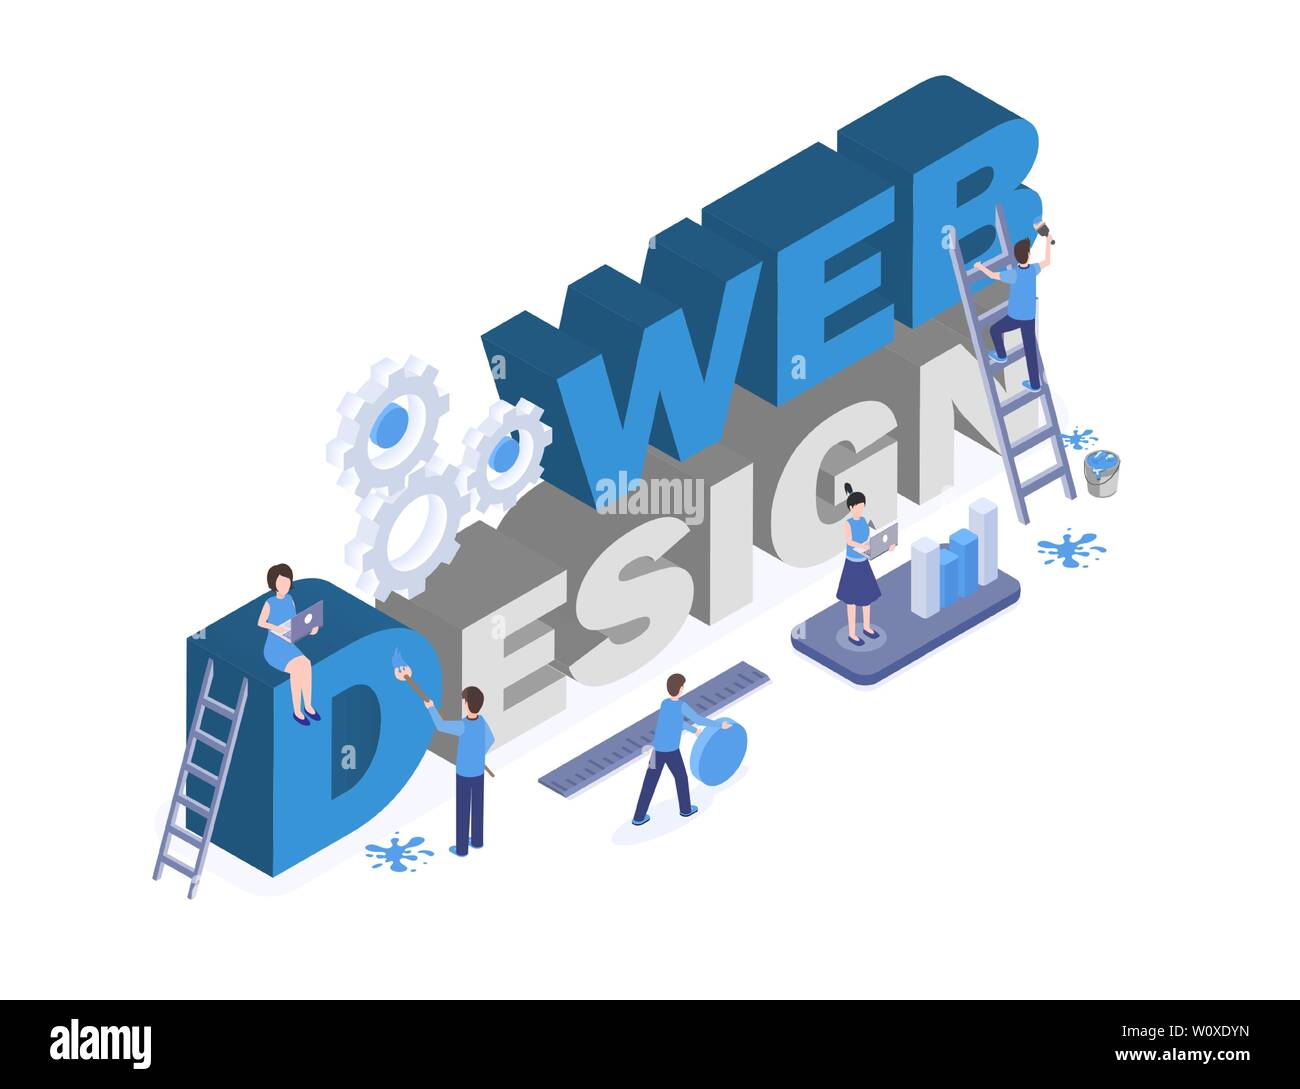 Web design banner vector template. Graphic and digital design studio workers teamworking, searching creative solutions 3d characters. Mobile app interface development, market analysis illustration Stock Vector